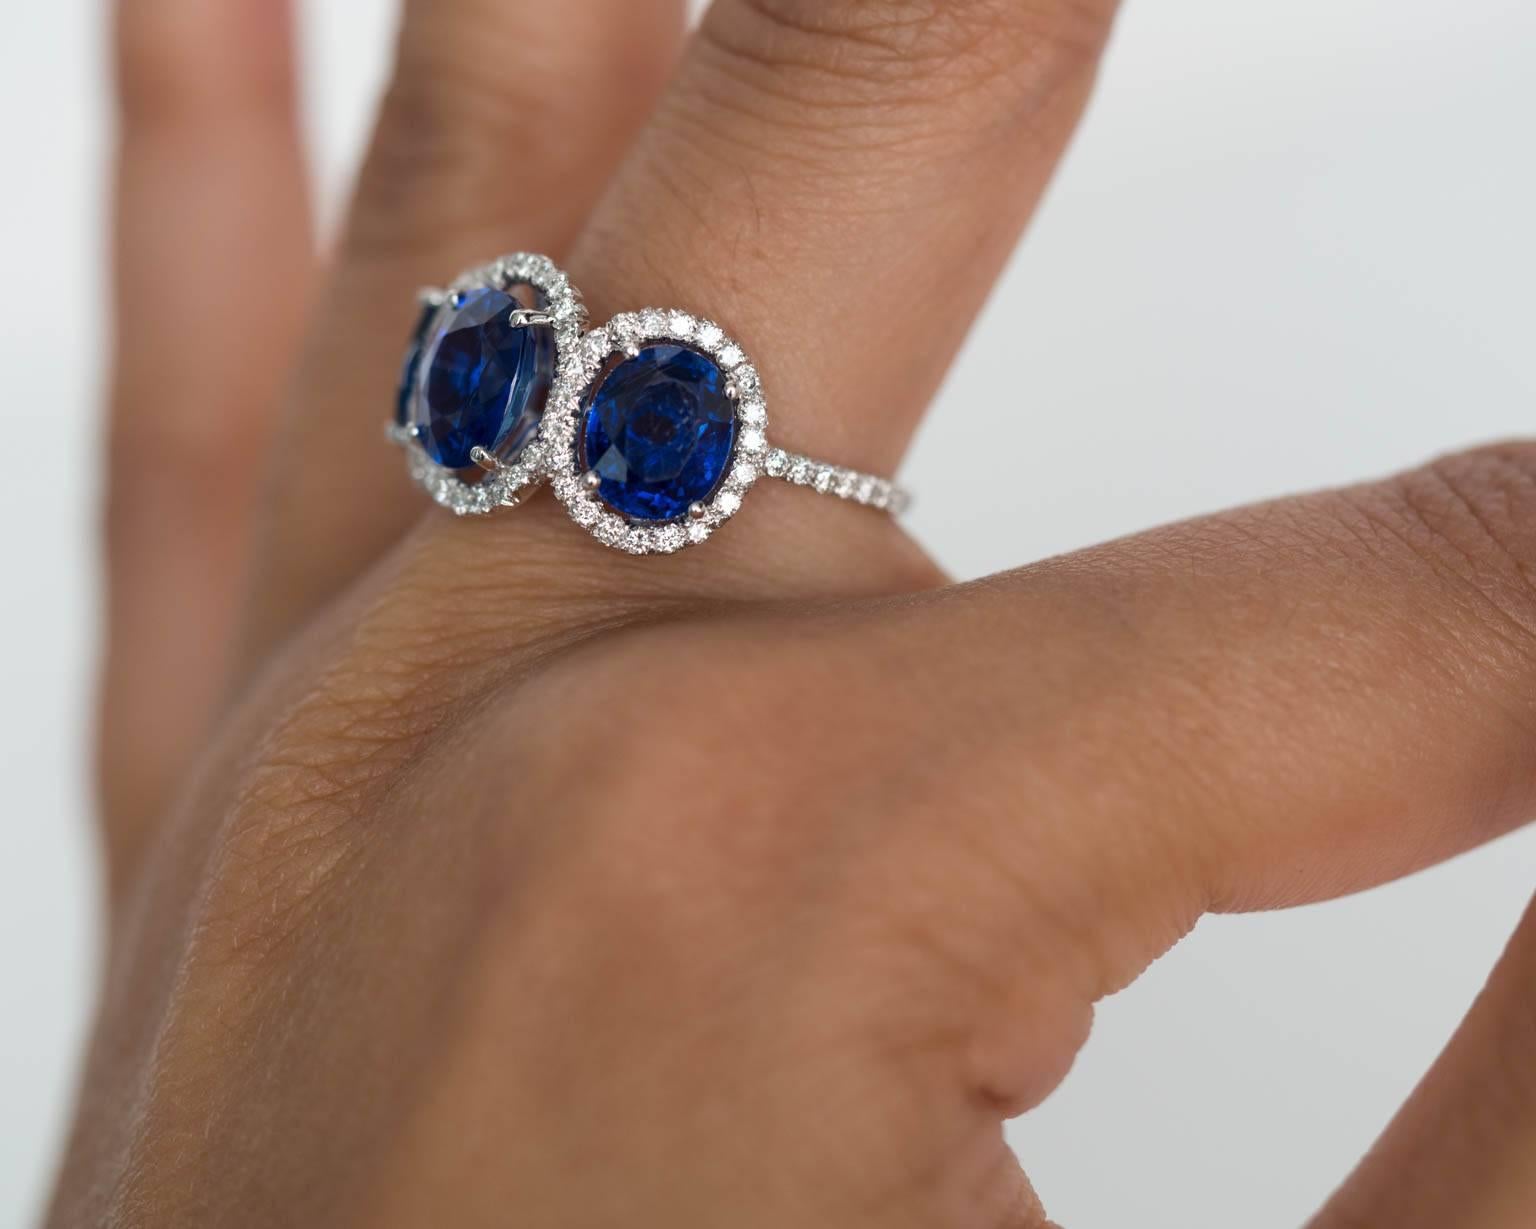 This platinum handcrafted piece is nothing short of breathtaking and spectacular. The sapphires are all unheated and Burma origin. Approximate size on the sapphires is about 2 carat center and 1.75ct each side. They are surrounded in a halo of micro